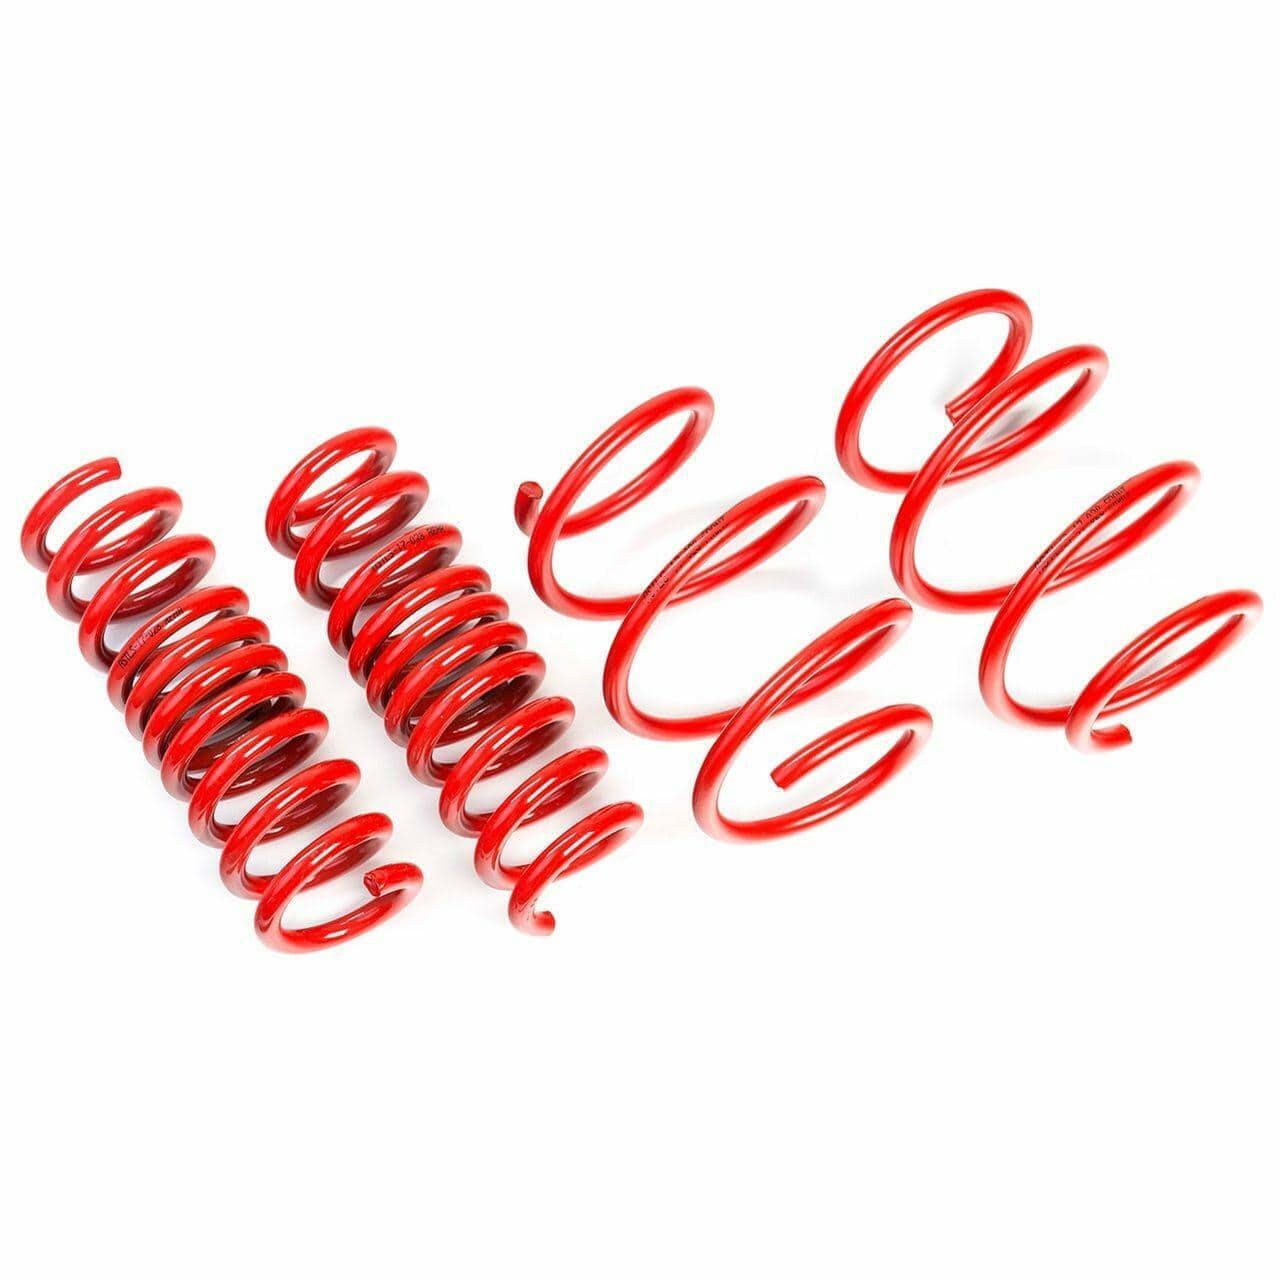 AST Suspension Lowering Springs (40MM/40MM TUV) - 1987-1994 BMW 3 Series Allroad 4WD 6CYL Touring (E30) ASTLS-14-343